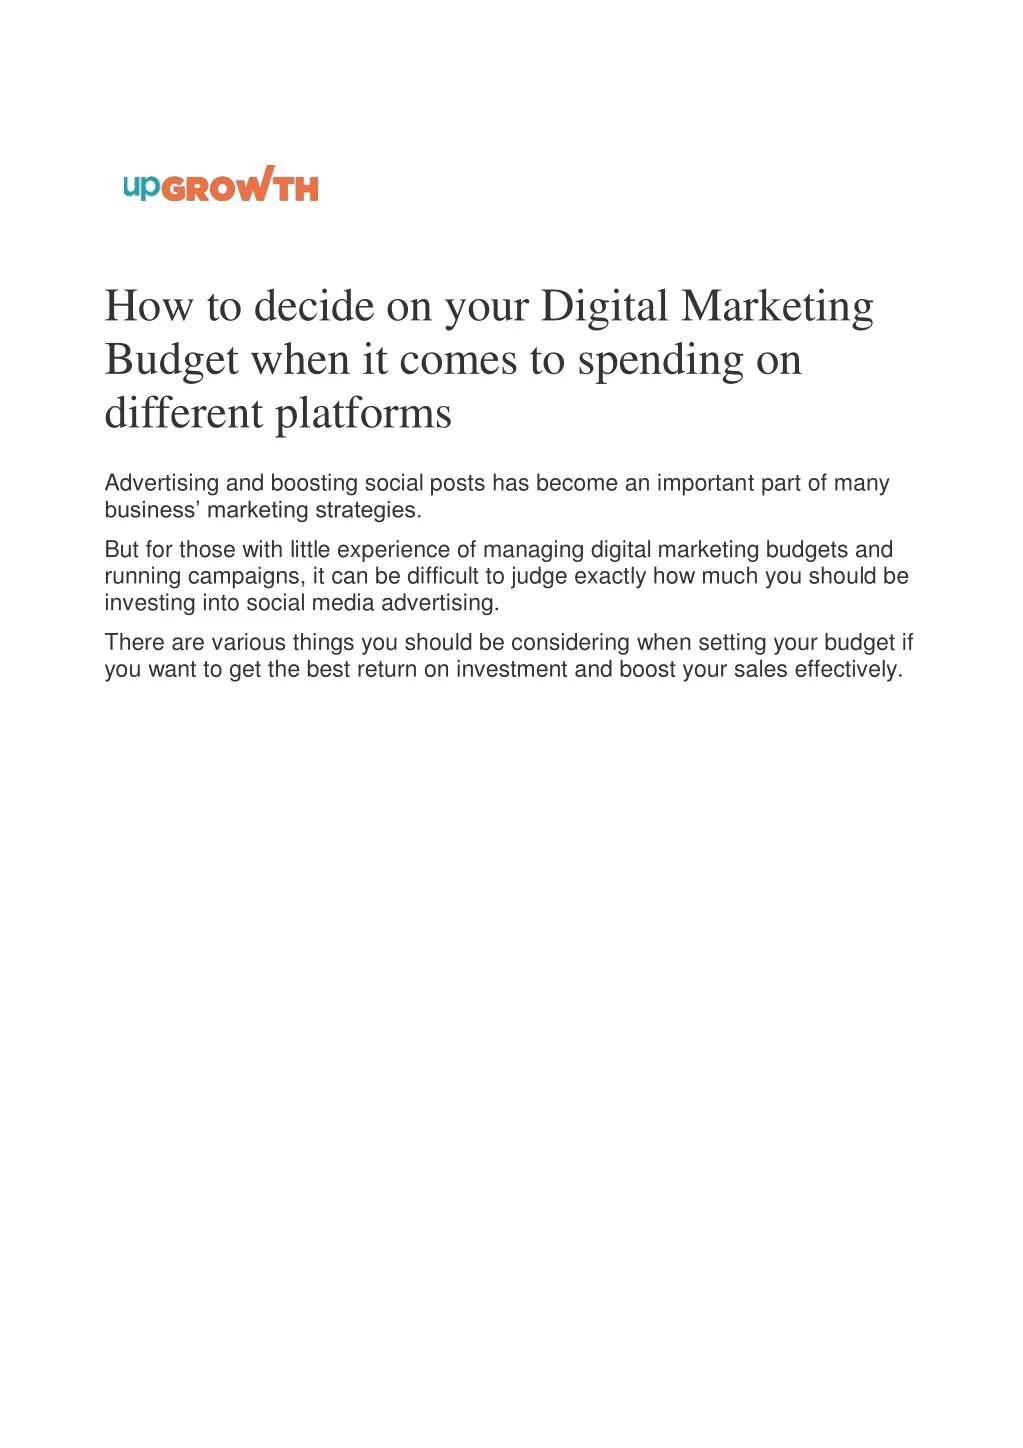 how to decide on your digital marketing budget